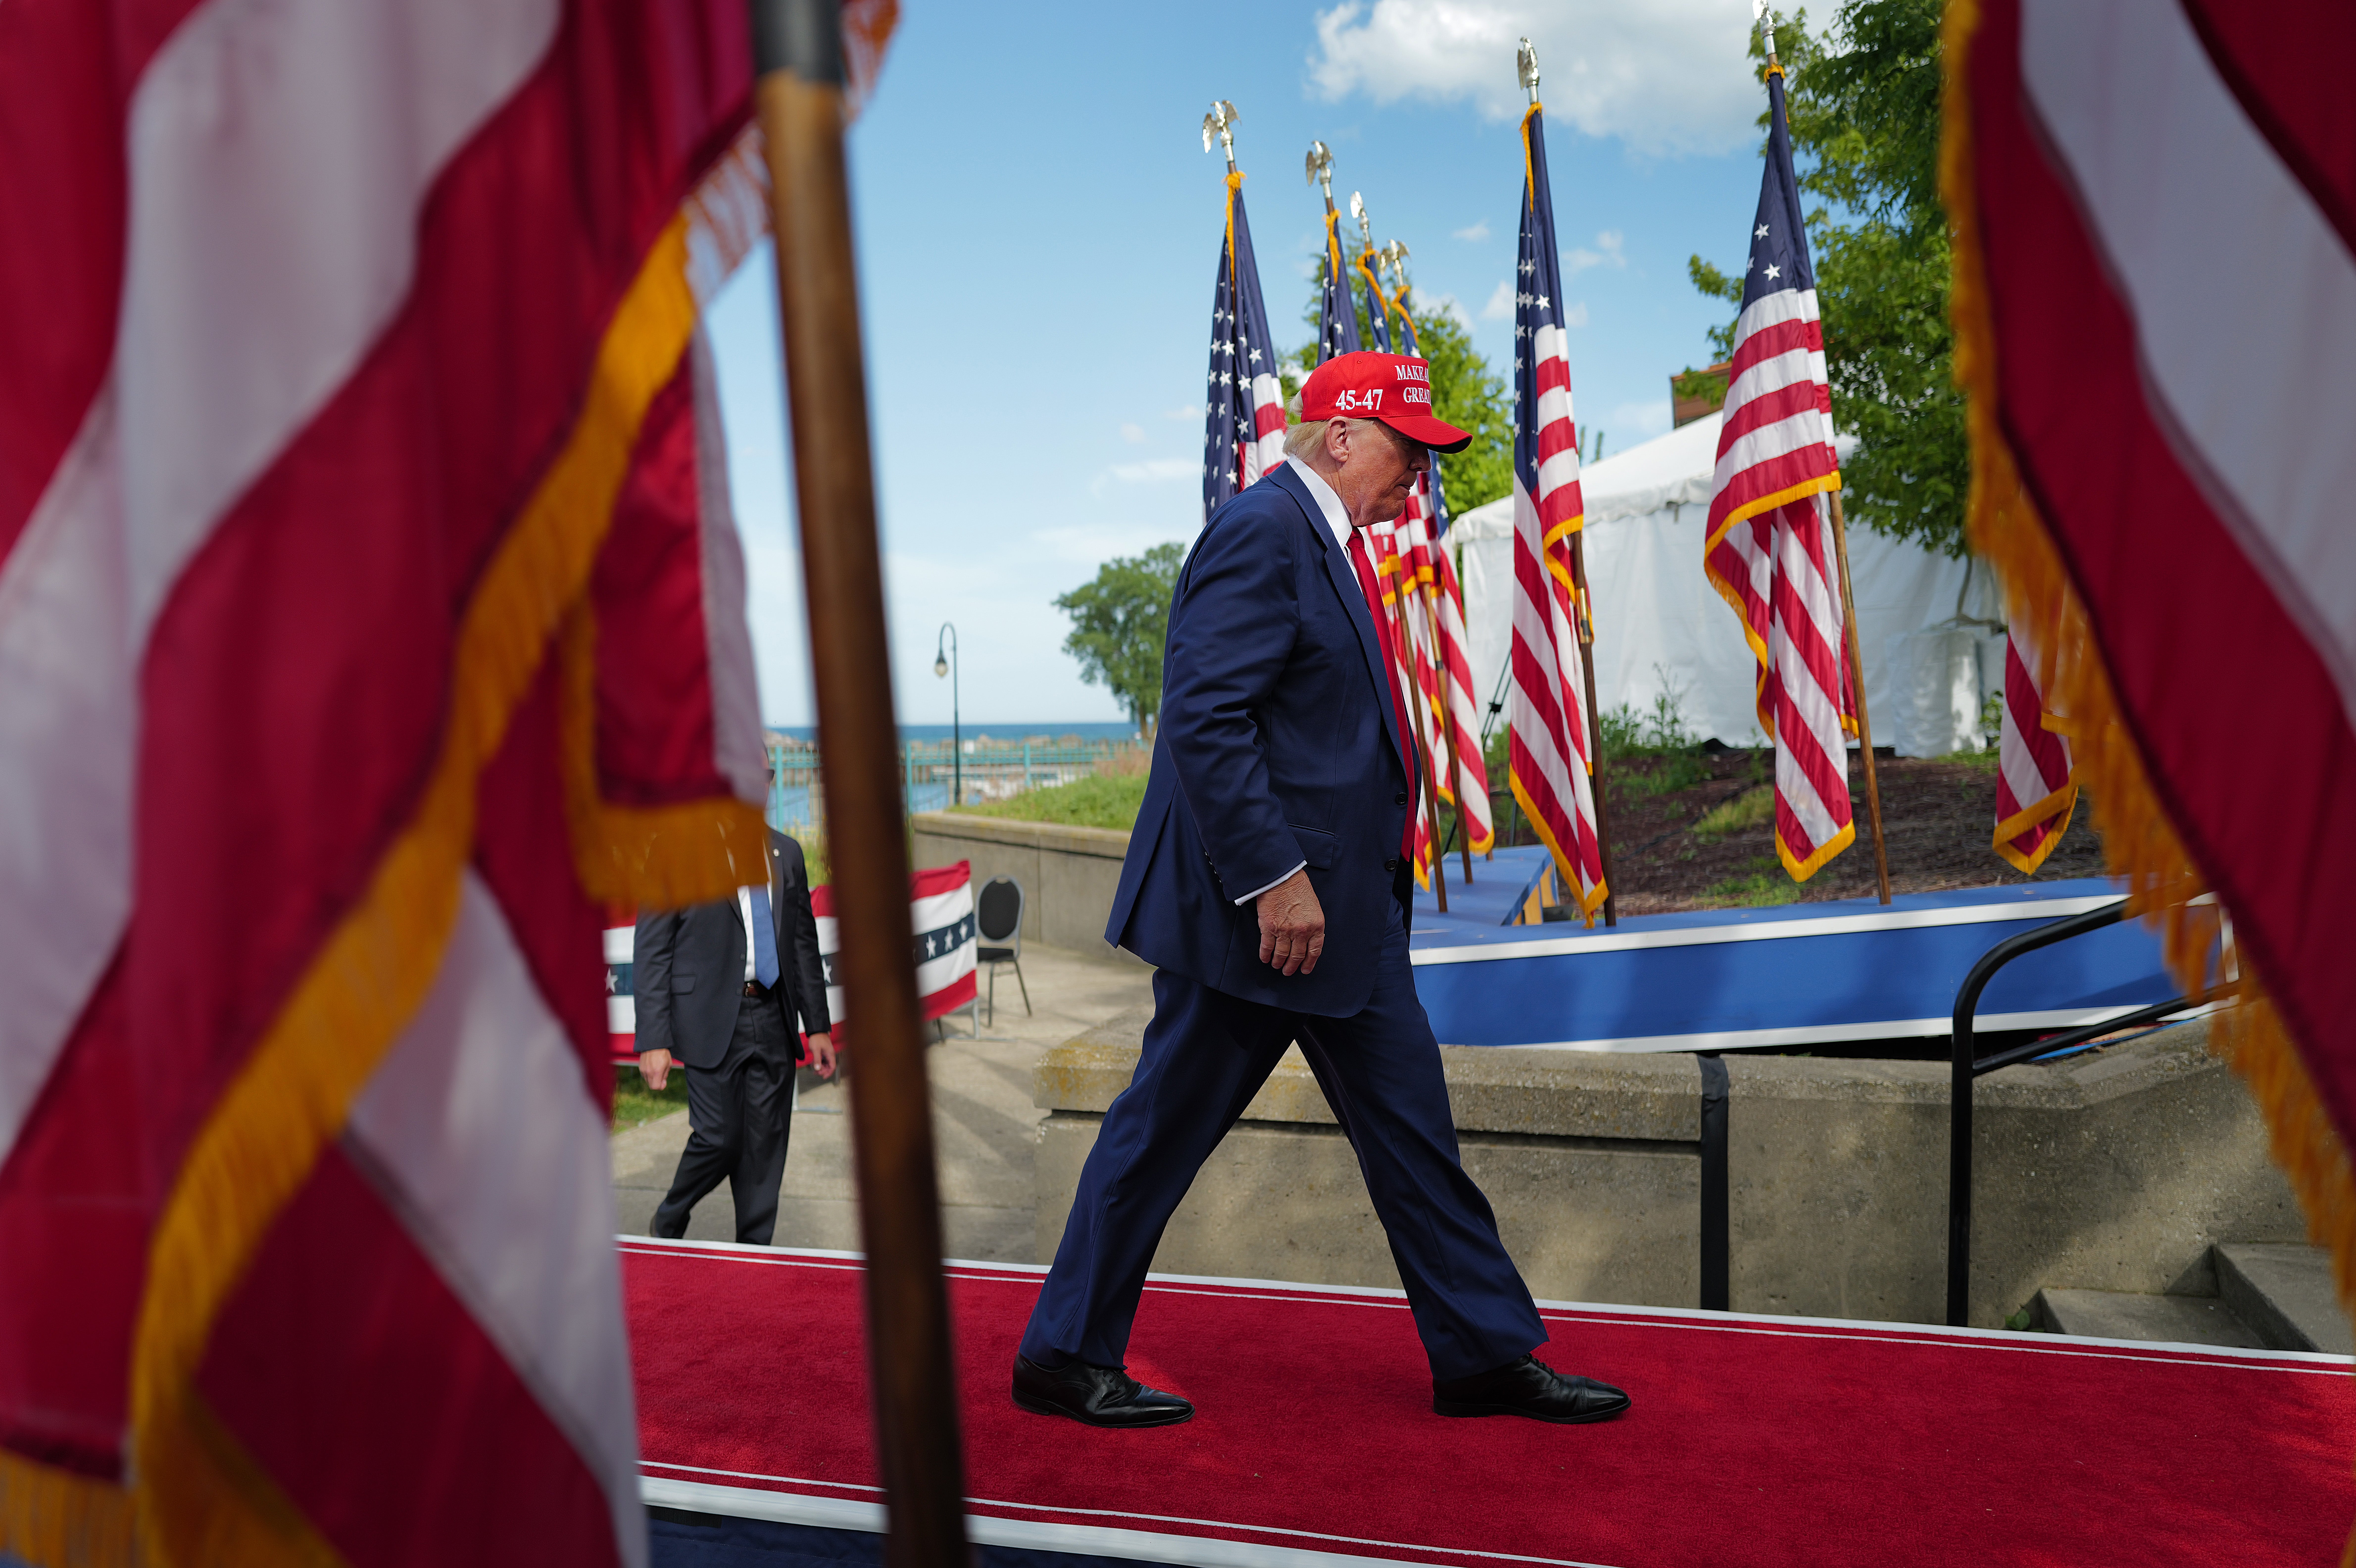 Republican presidential candidate former President Donald Trump leaves a rally at Festival Park on June 18, 2024 in Racine, Wisconsin. During the event he said he “loves” Milwaukee after previousl bashing the city.